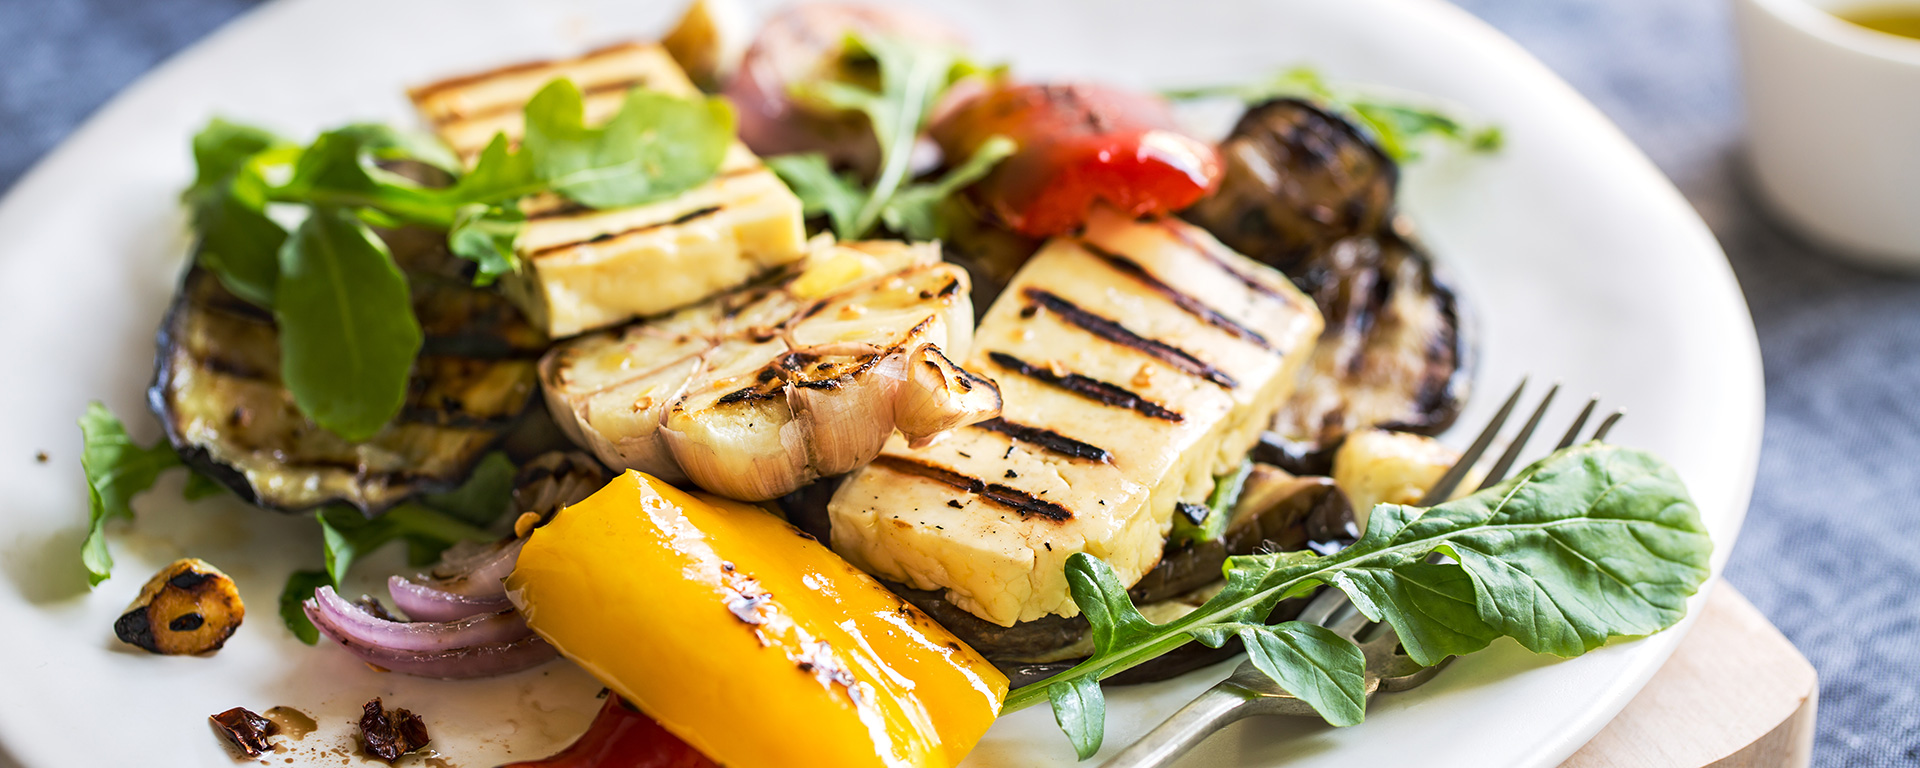 Photo for - Grilled Halloumi Cheese & Vegetable Salad